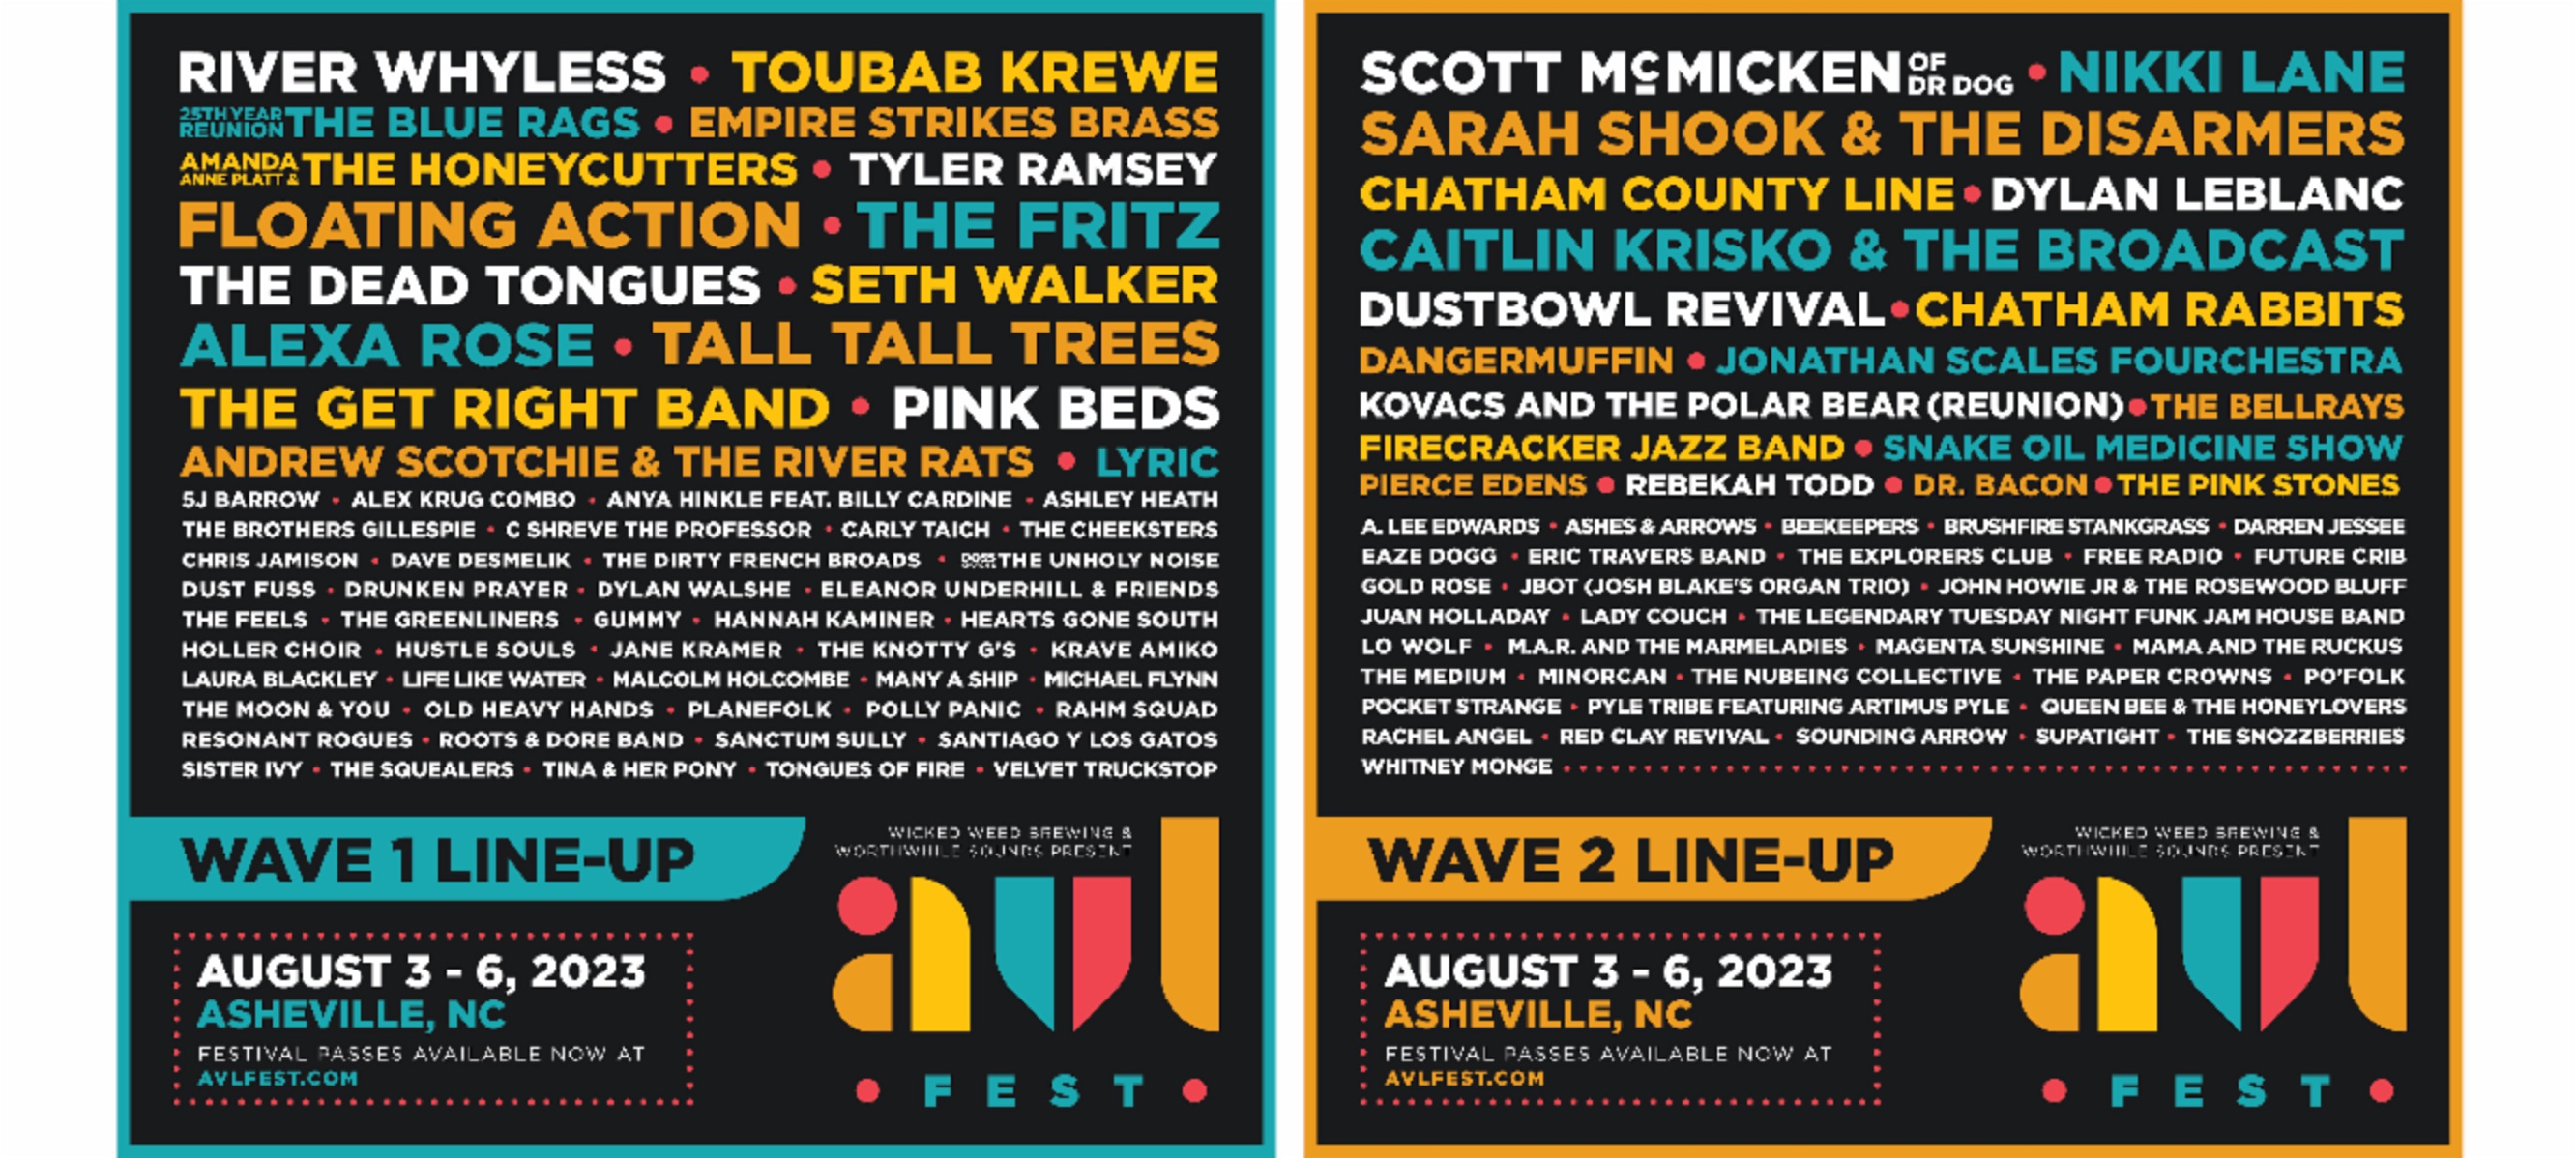 AVLFest Confirms Wave 1 and 2 Artist Lineup for August 3-6, 2023 Inaugural Event